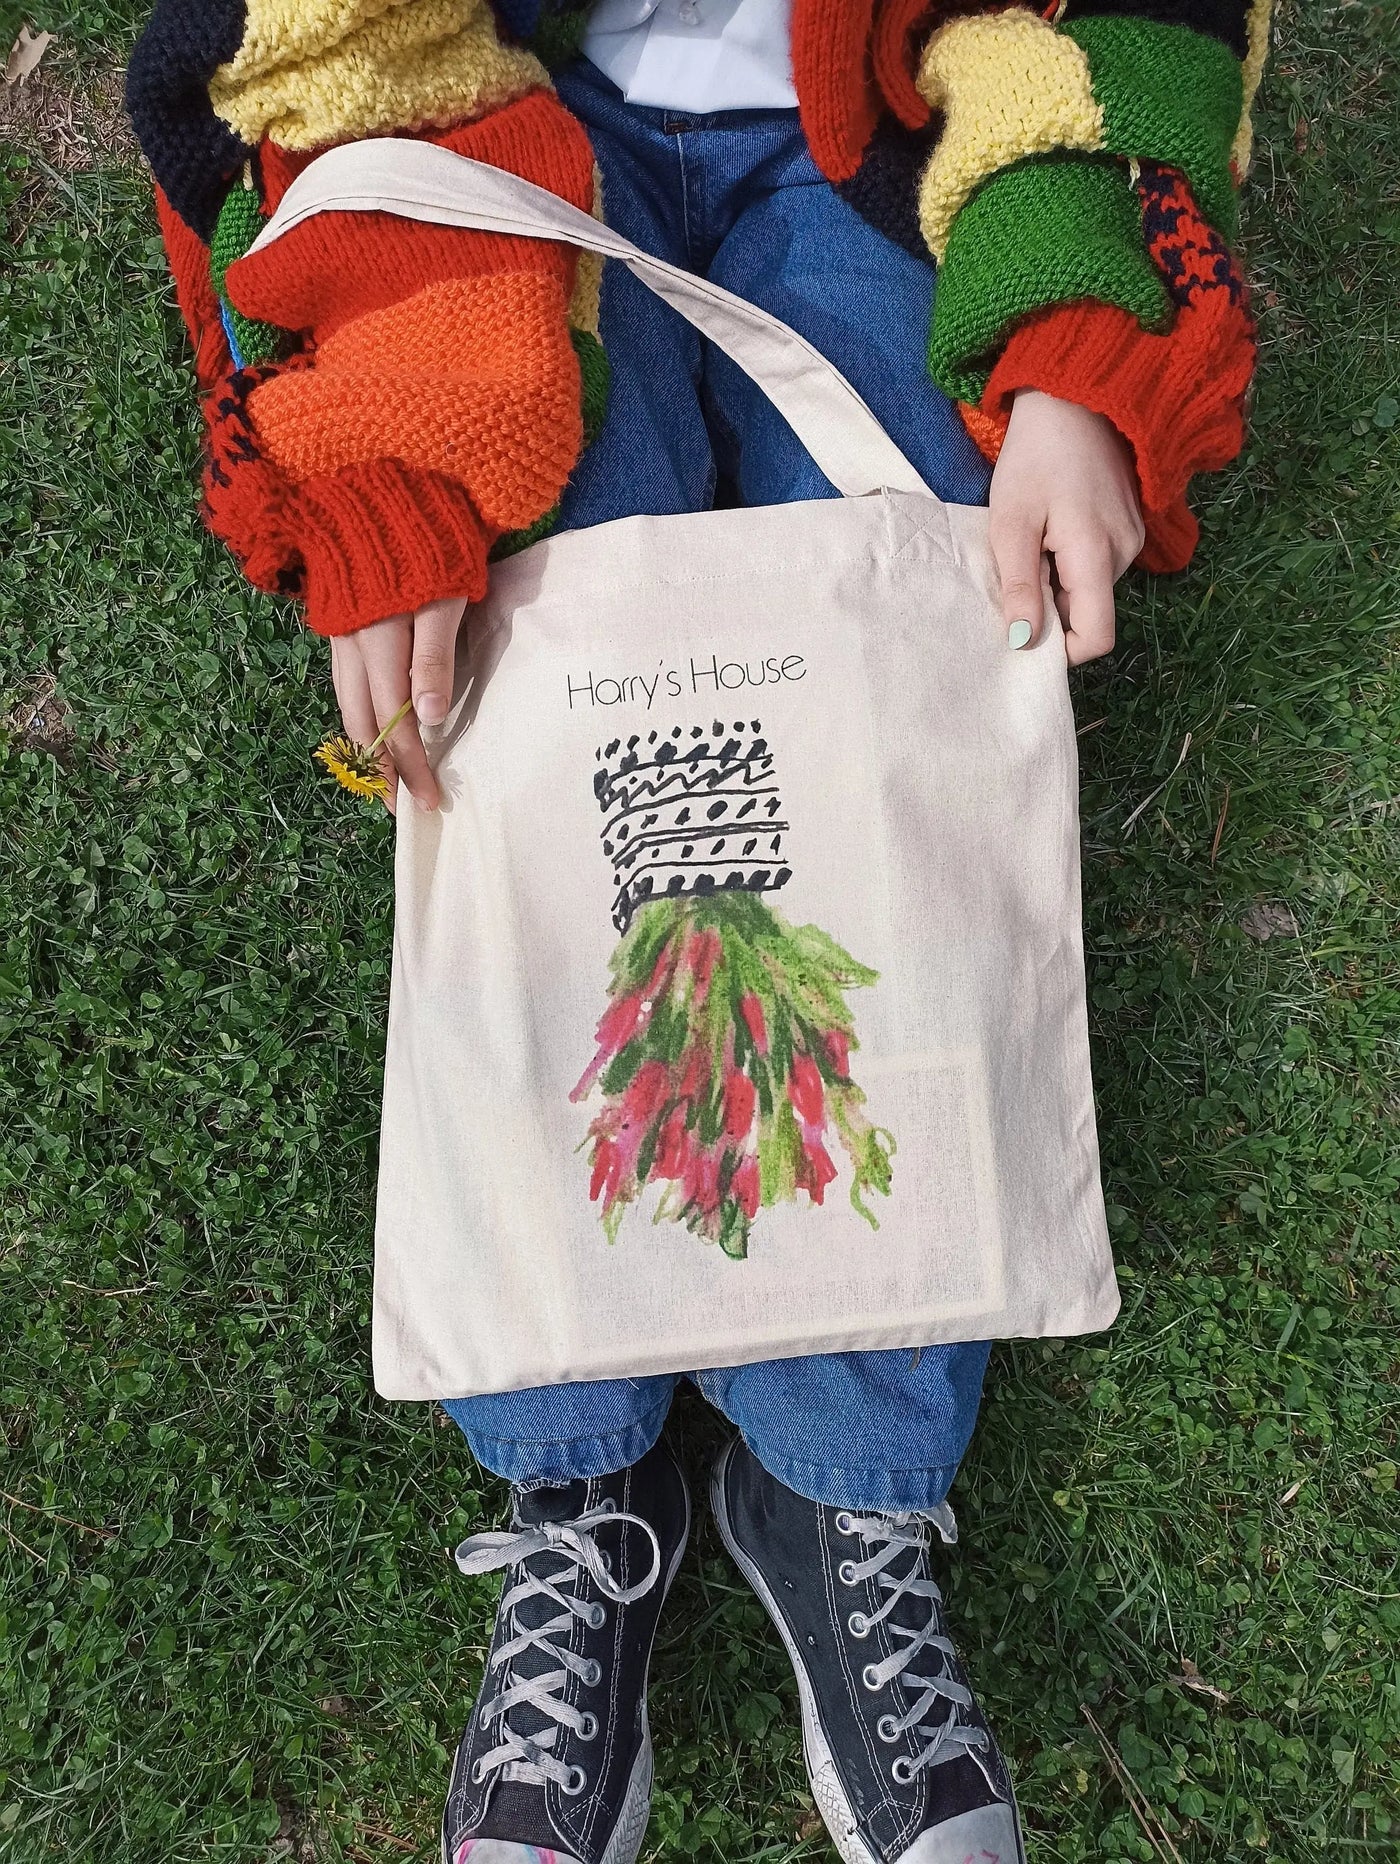 Harry's House Tote Bag, Harry Styles Flower Tote Bag, Harry Styles Merch, Harry Styles Love On Tour Tote Bag, As it Was Raveloo